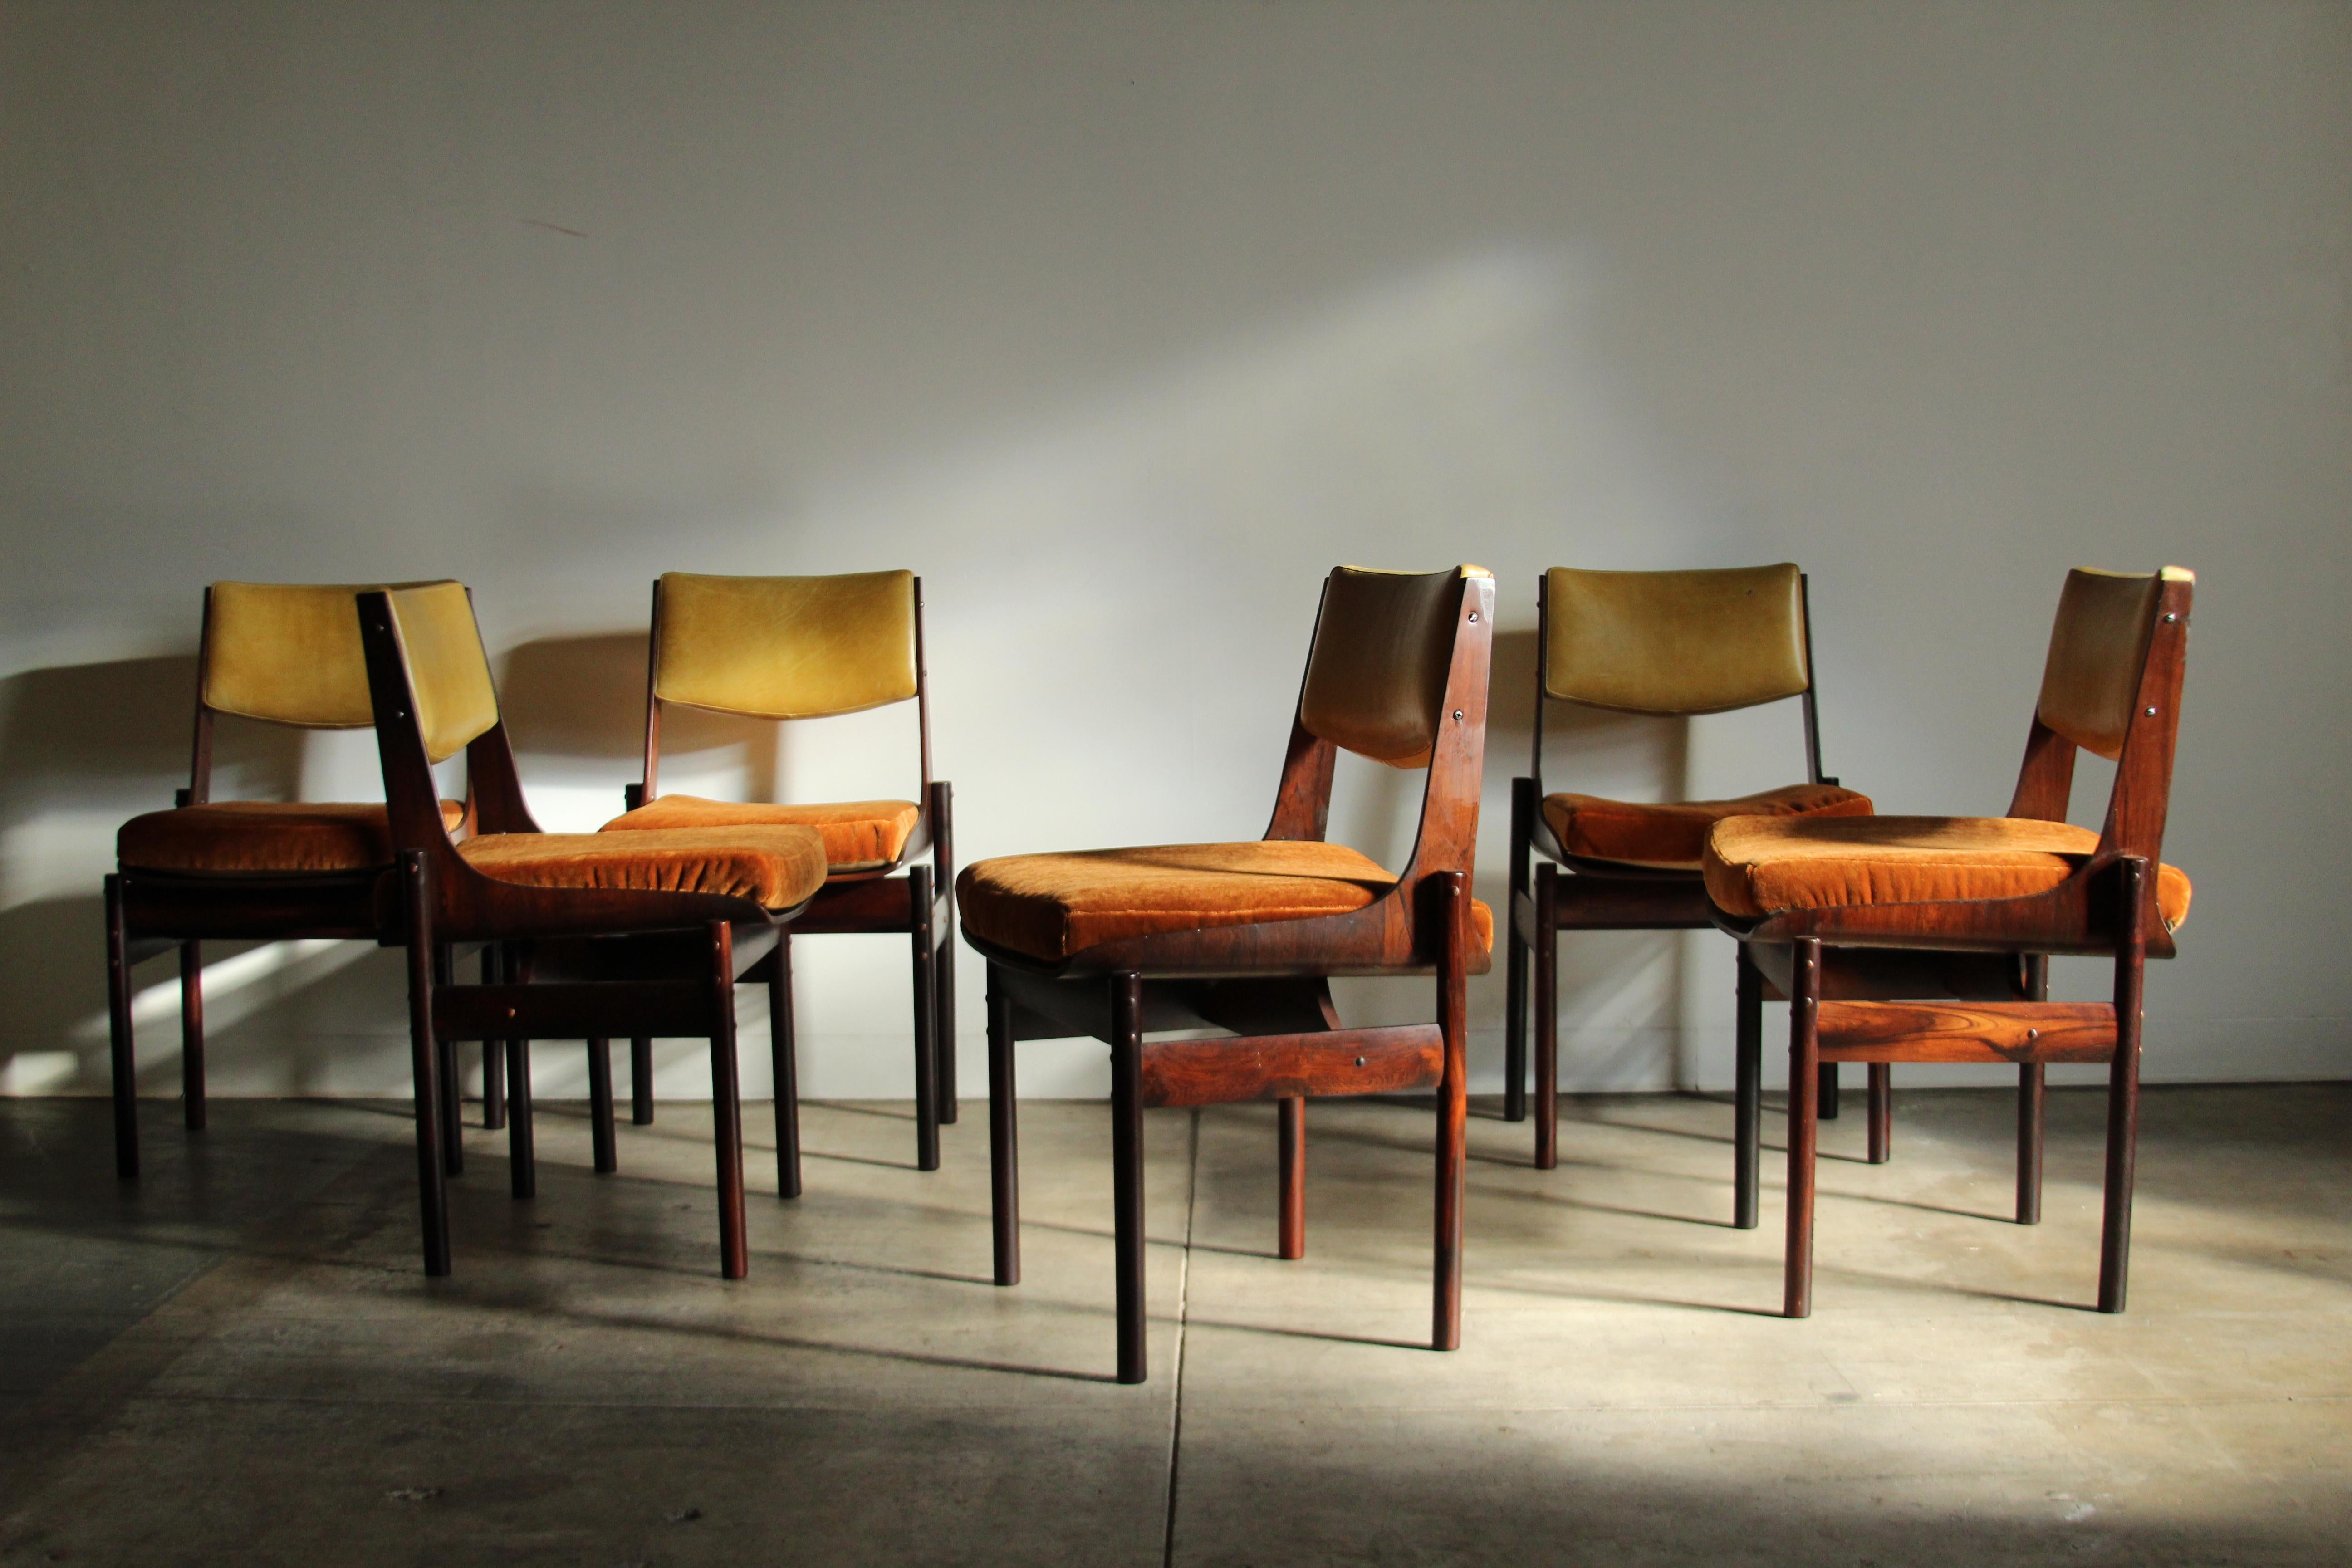 A spectacular set of 6 Brazilian rosewood dining chairs attributed to the renowned Brazilian designer, Jorge Zalszupin. The chairs consist of stunning rosewood frames with original citrine leather back cushions and brand new burnt orange mohair seat